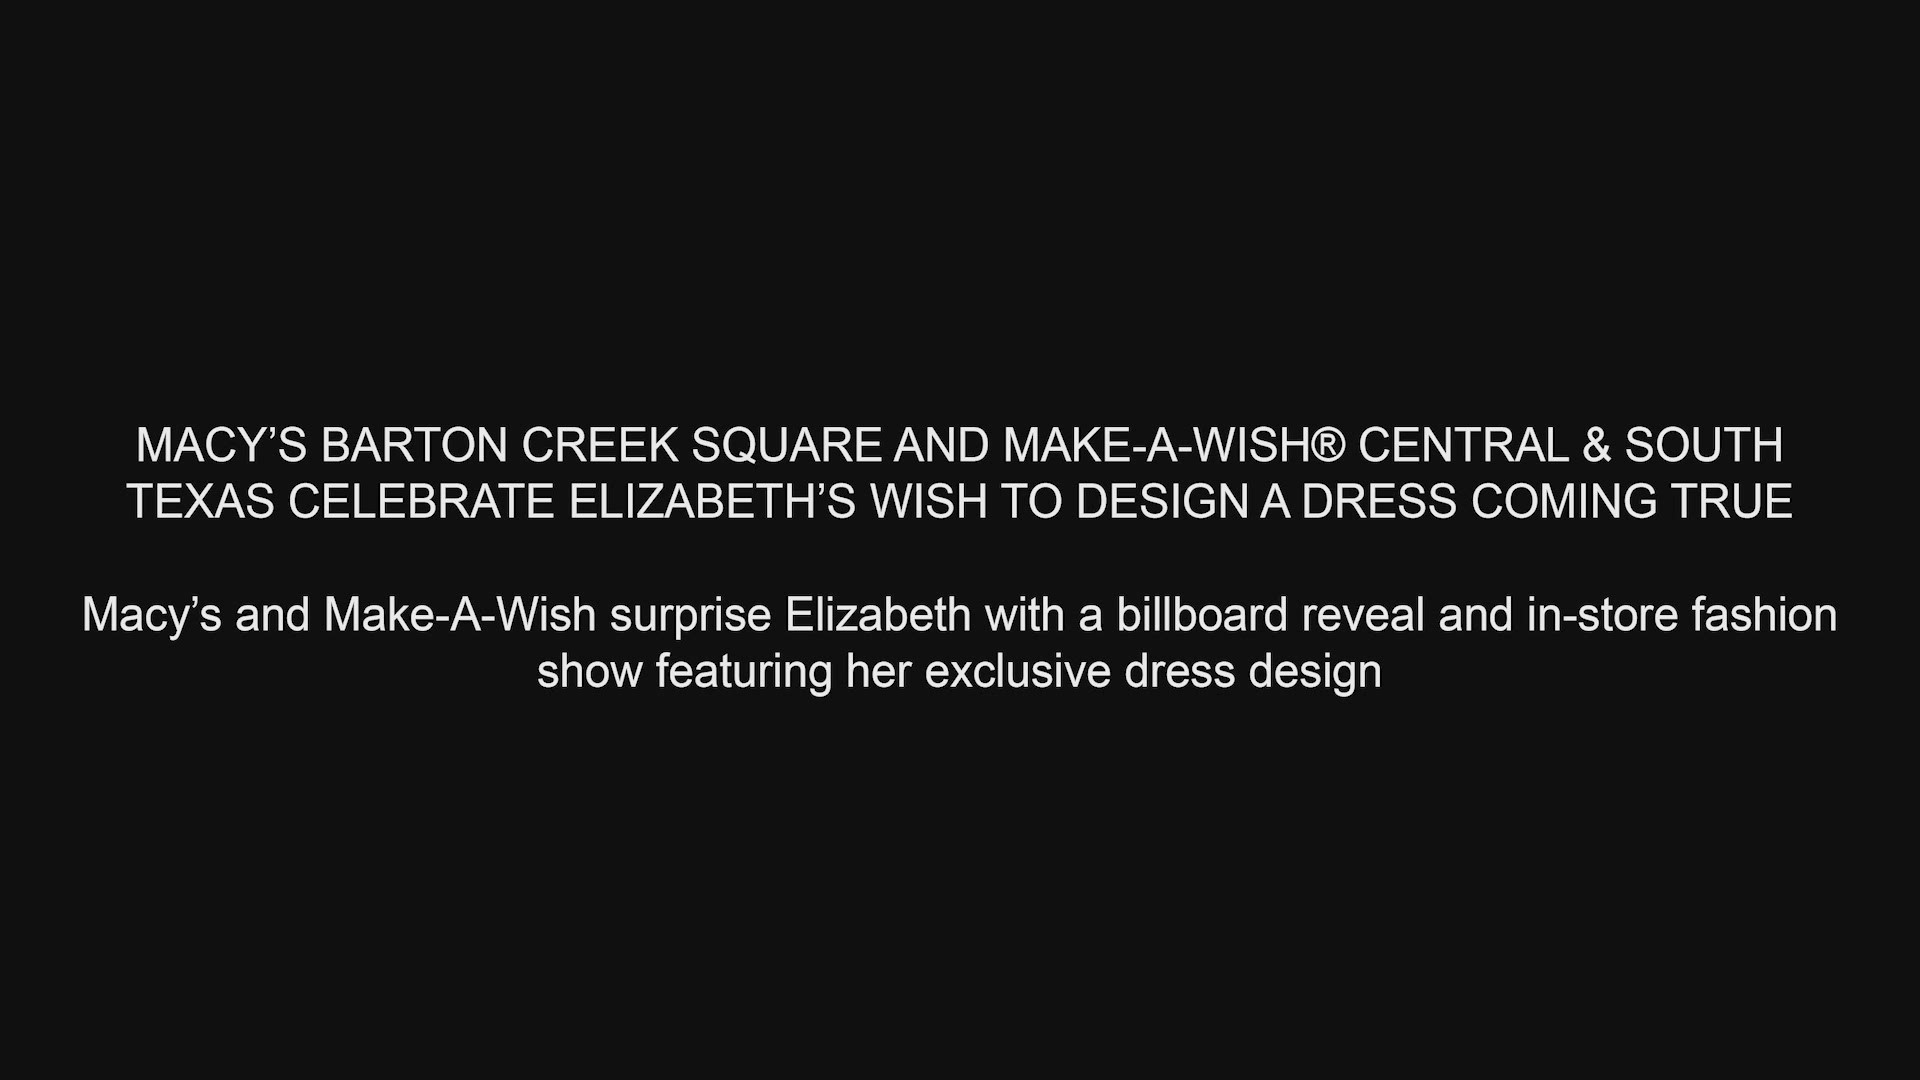 With the help of Macy's Barton Creek Square Mall and Make-A-Wish Central and South Texas, Elizabeth's wish to design a dress has come true. Video courtesy of Macy's.